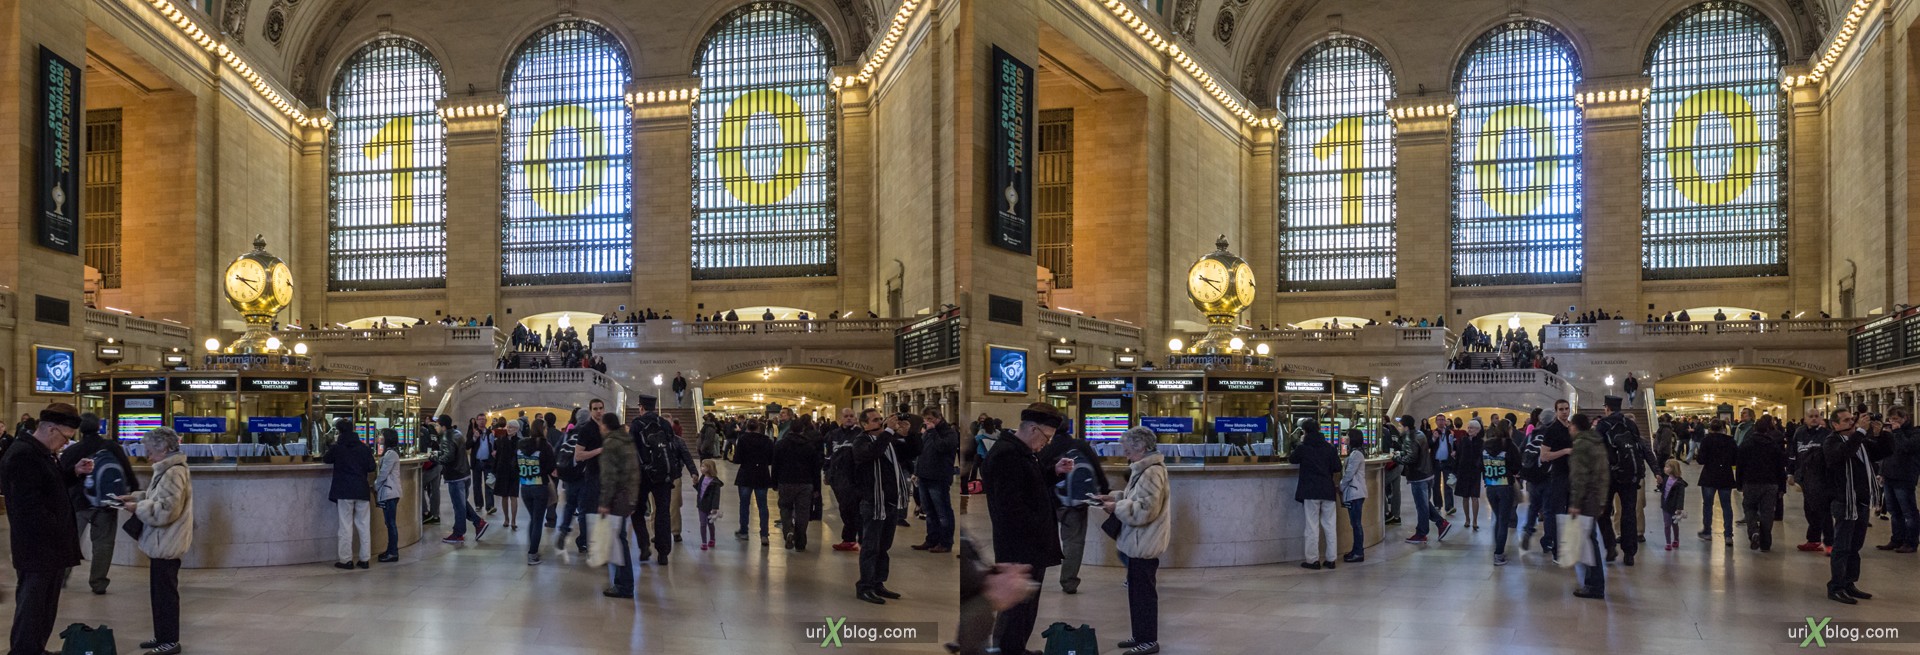 2013, Grand Central Terminal, NYC, New York City, USA, 3D, stereo pair, cross-eyed, crossview, cross view stereo pair, stereoscopic